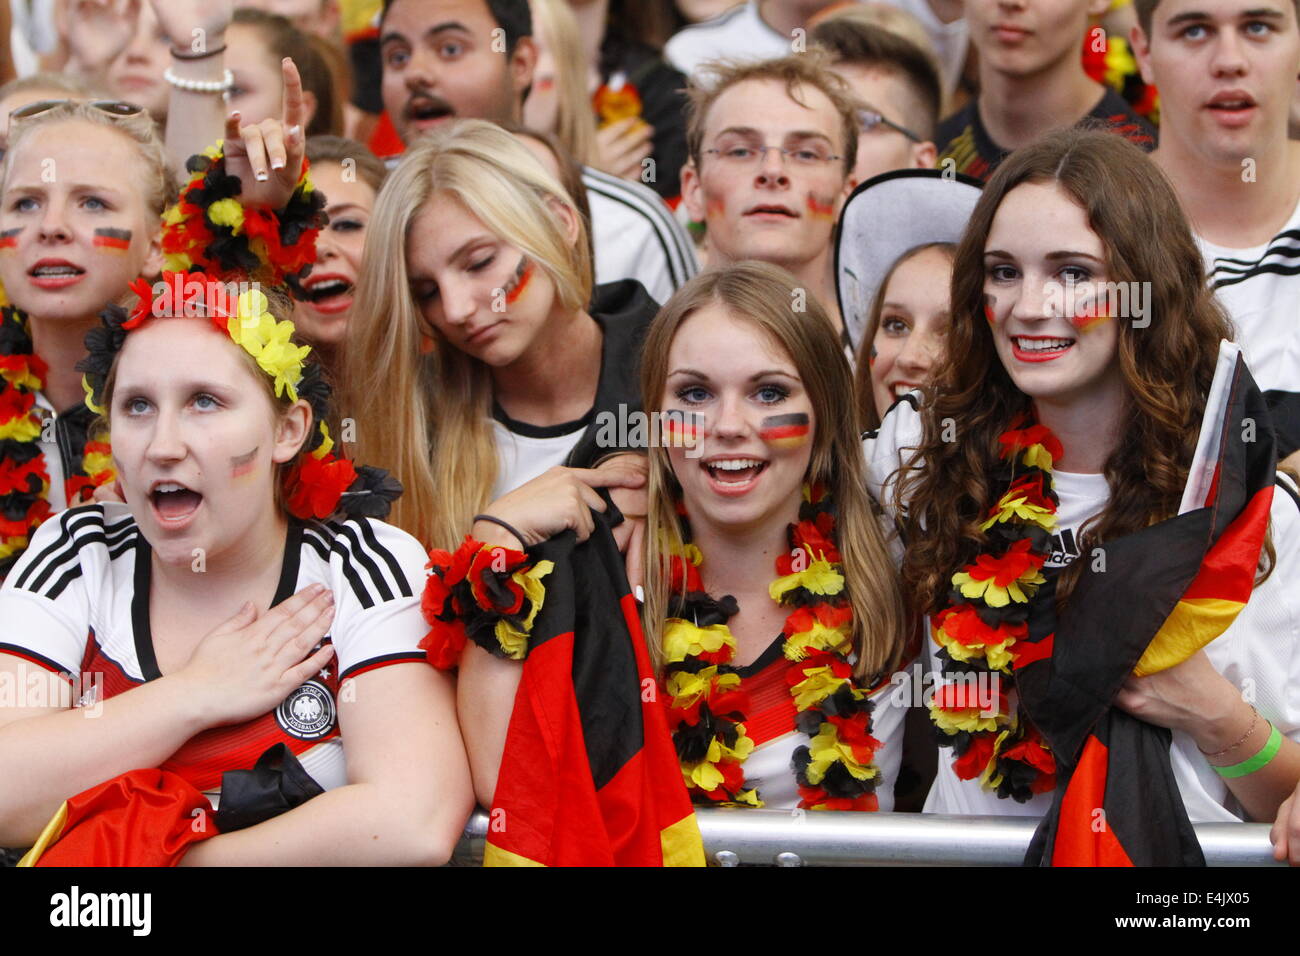 Frankfurt, Germany. 13th July, 2014. German fans sing the German National  Antheme. 50.000 fans watched the 2014 FIFA Soccer World Cup Final between  Germany and Argentina in Frankfurt's Commerzbank-Arena on Europe's largest